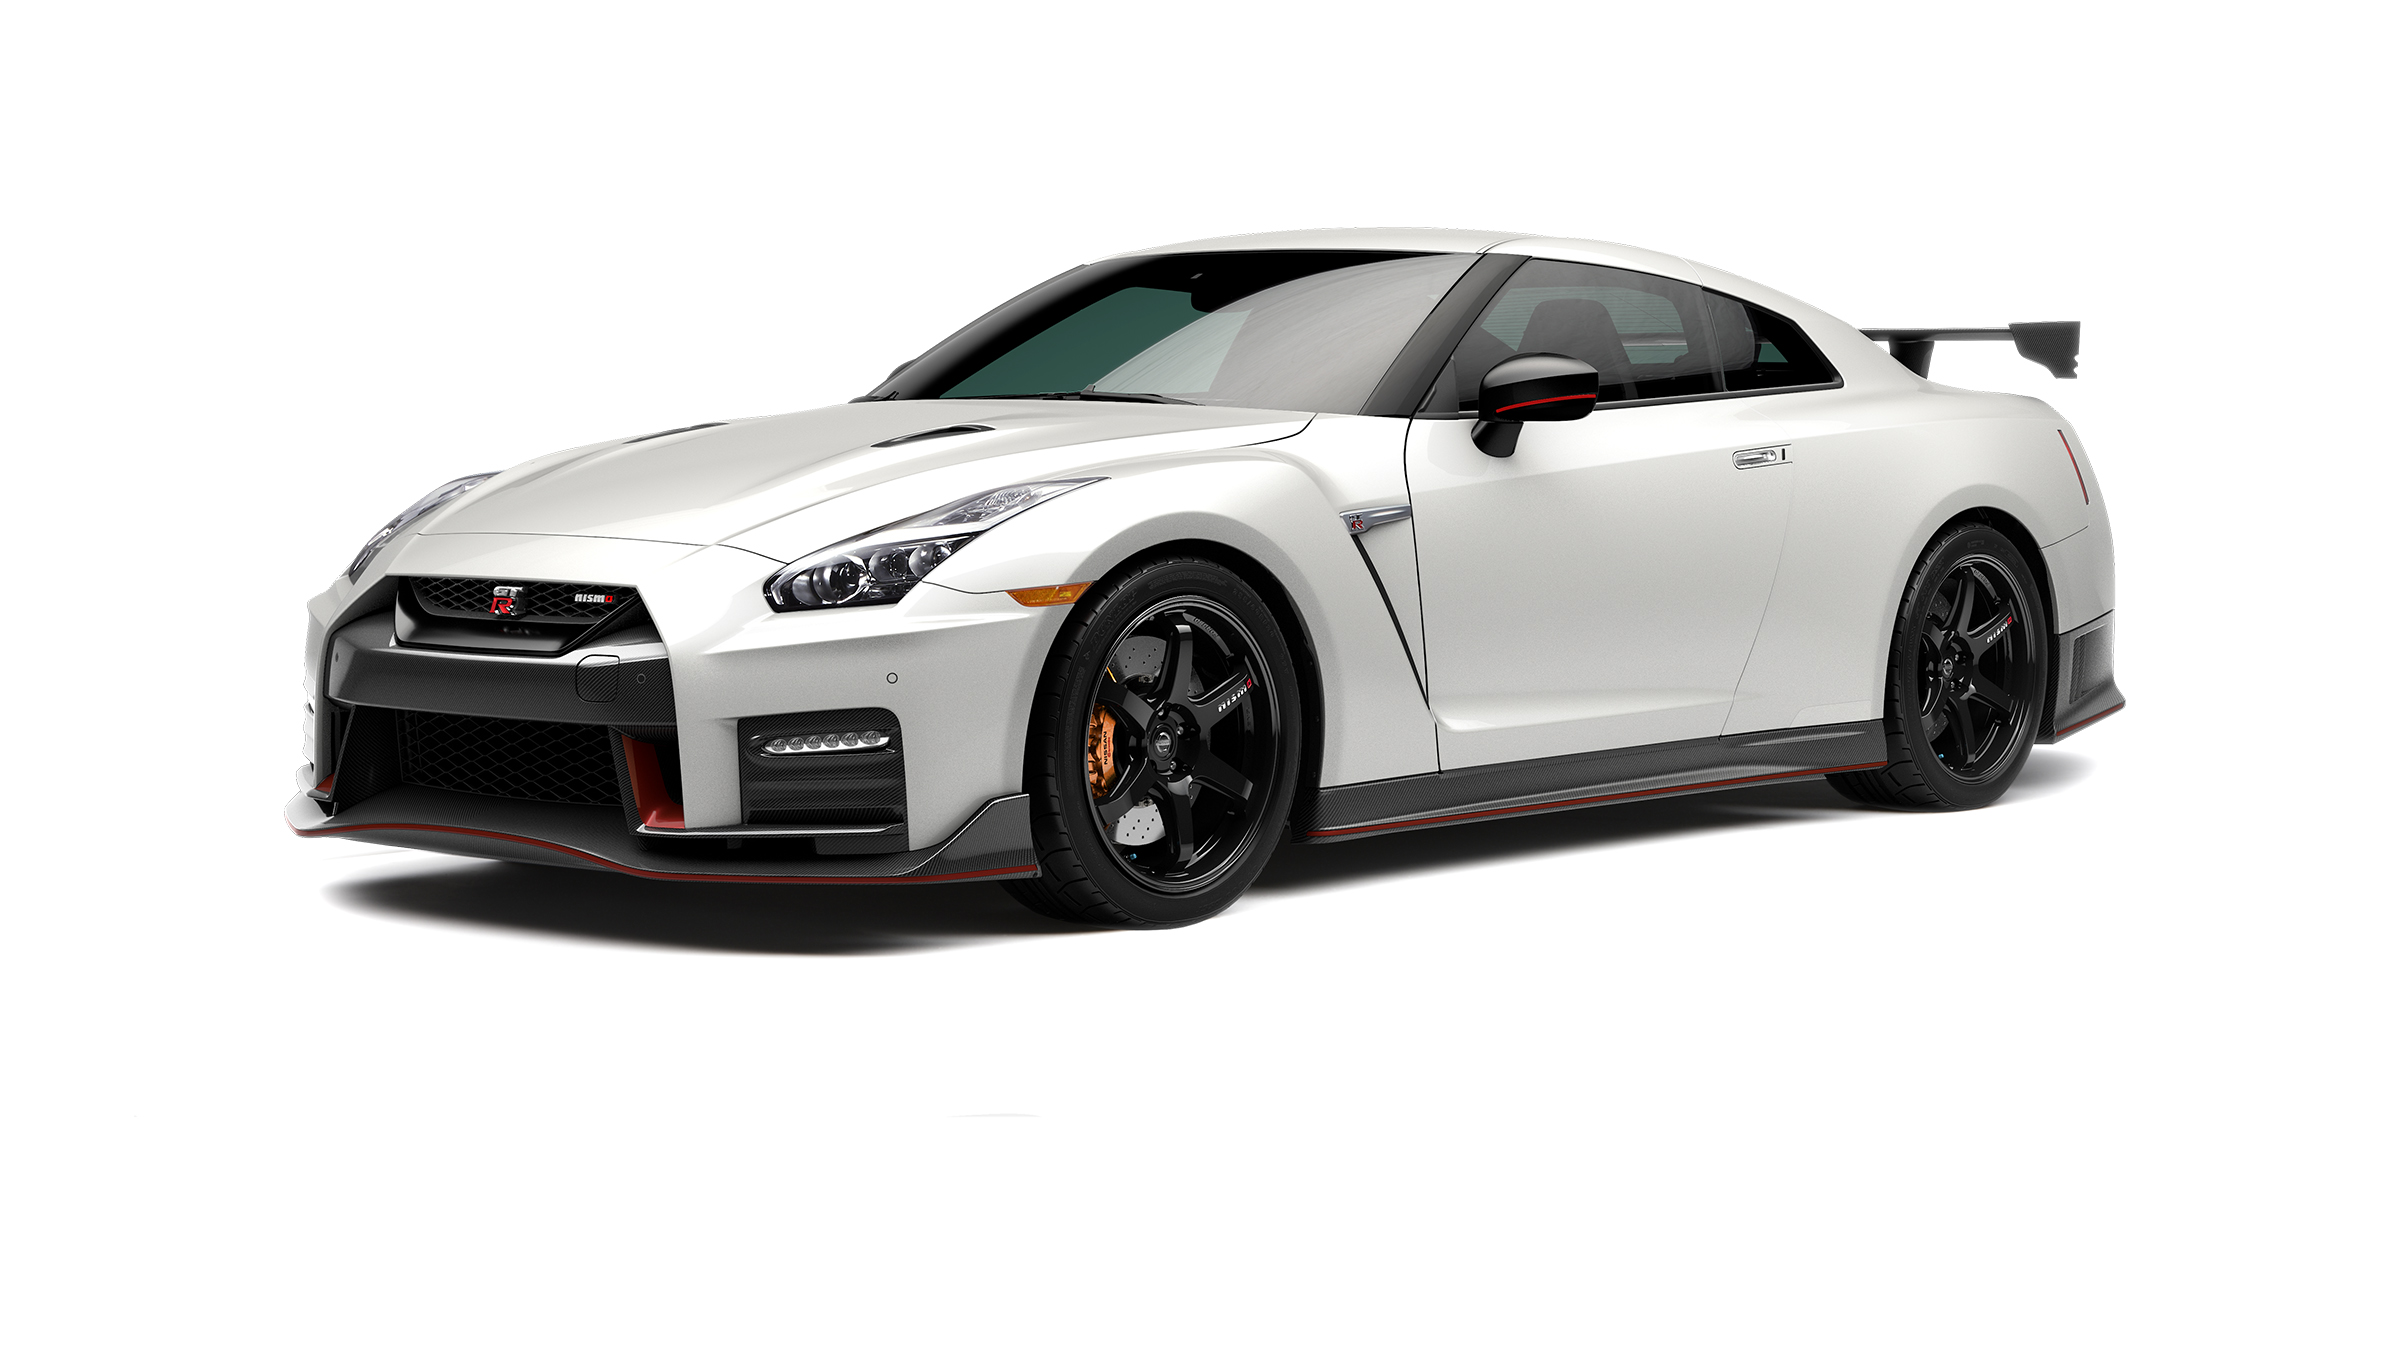 Experience NISMO Performance from Nissan Motorsports